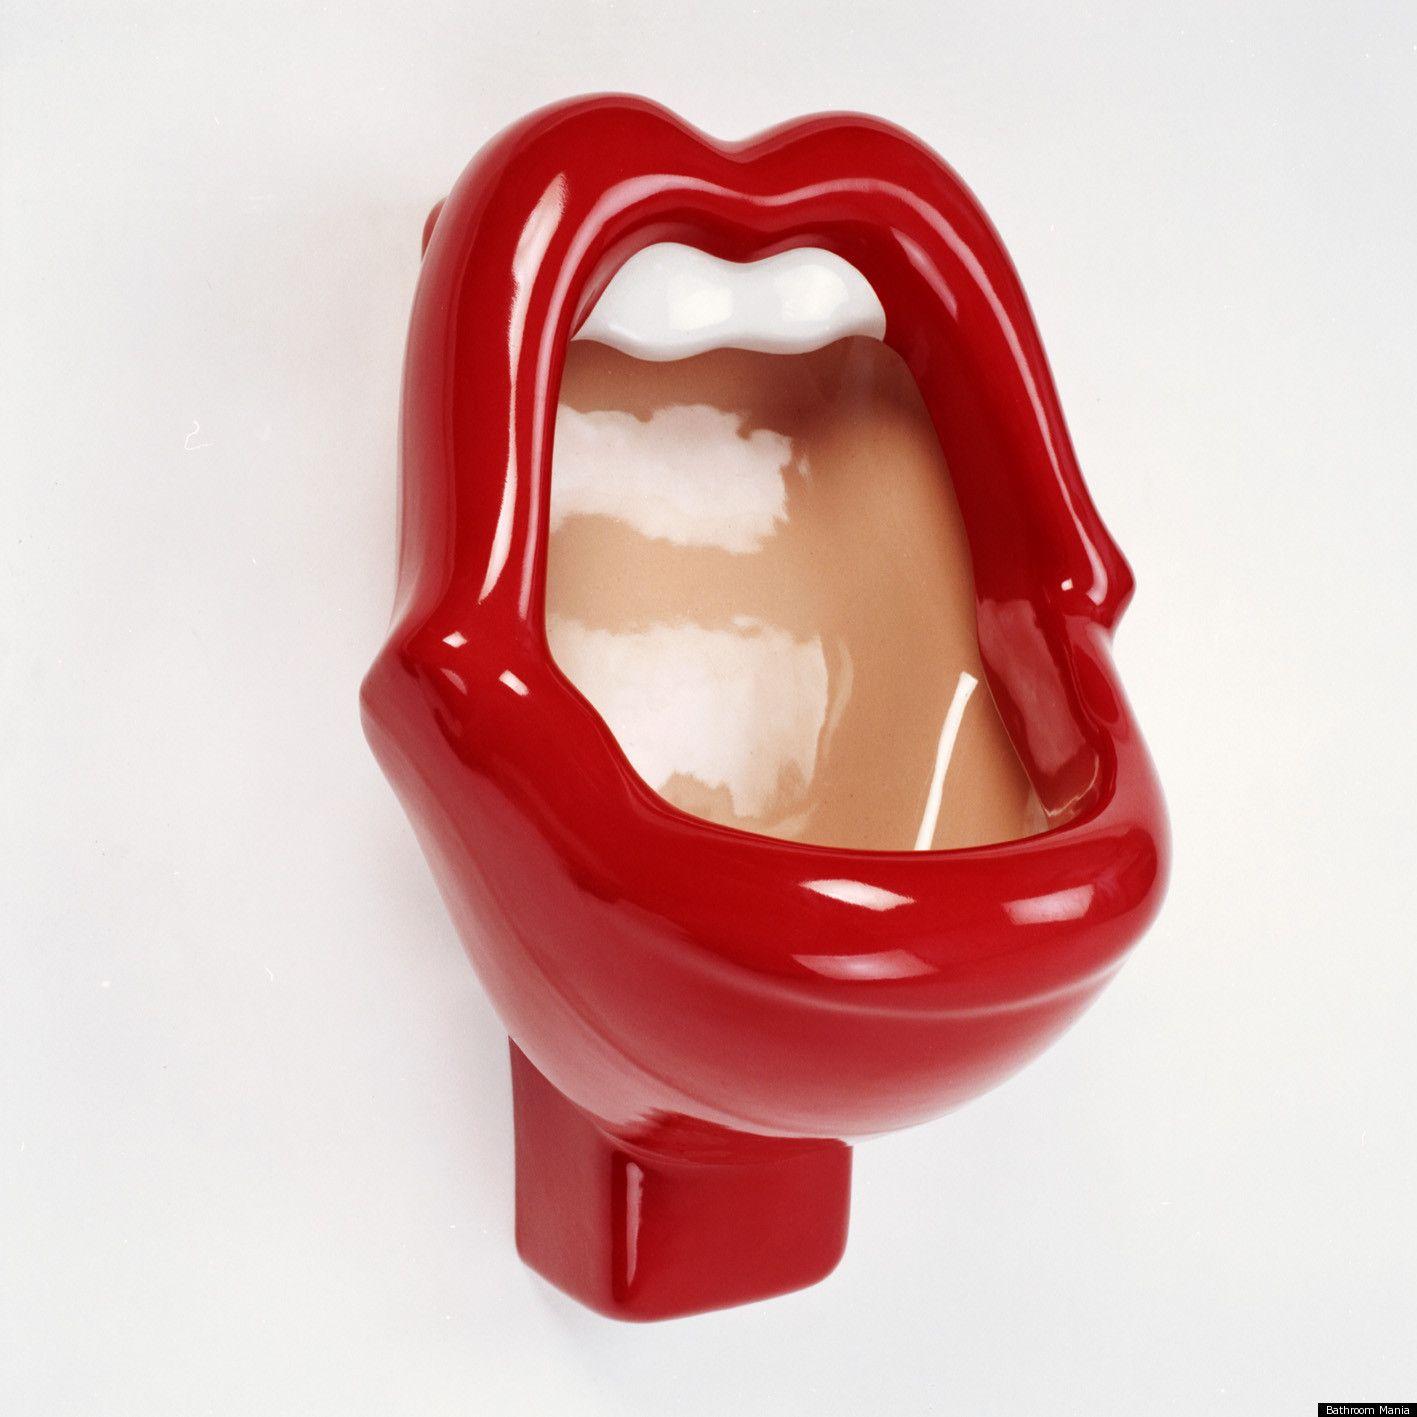 Hot Red Lips and Tongue Logo - Rolling Stone Mouth-Shaped Urinals Called Sexist (PHOTOS) | HuffPost